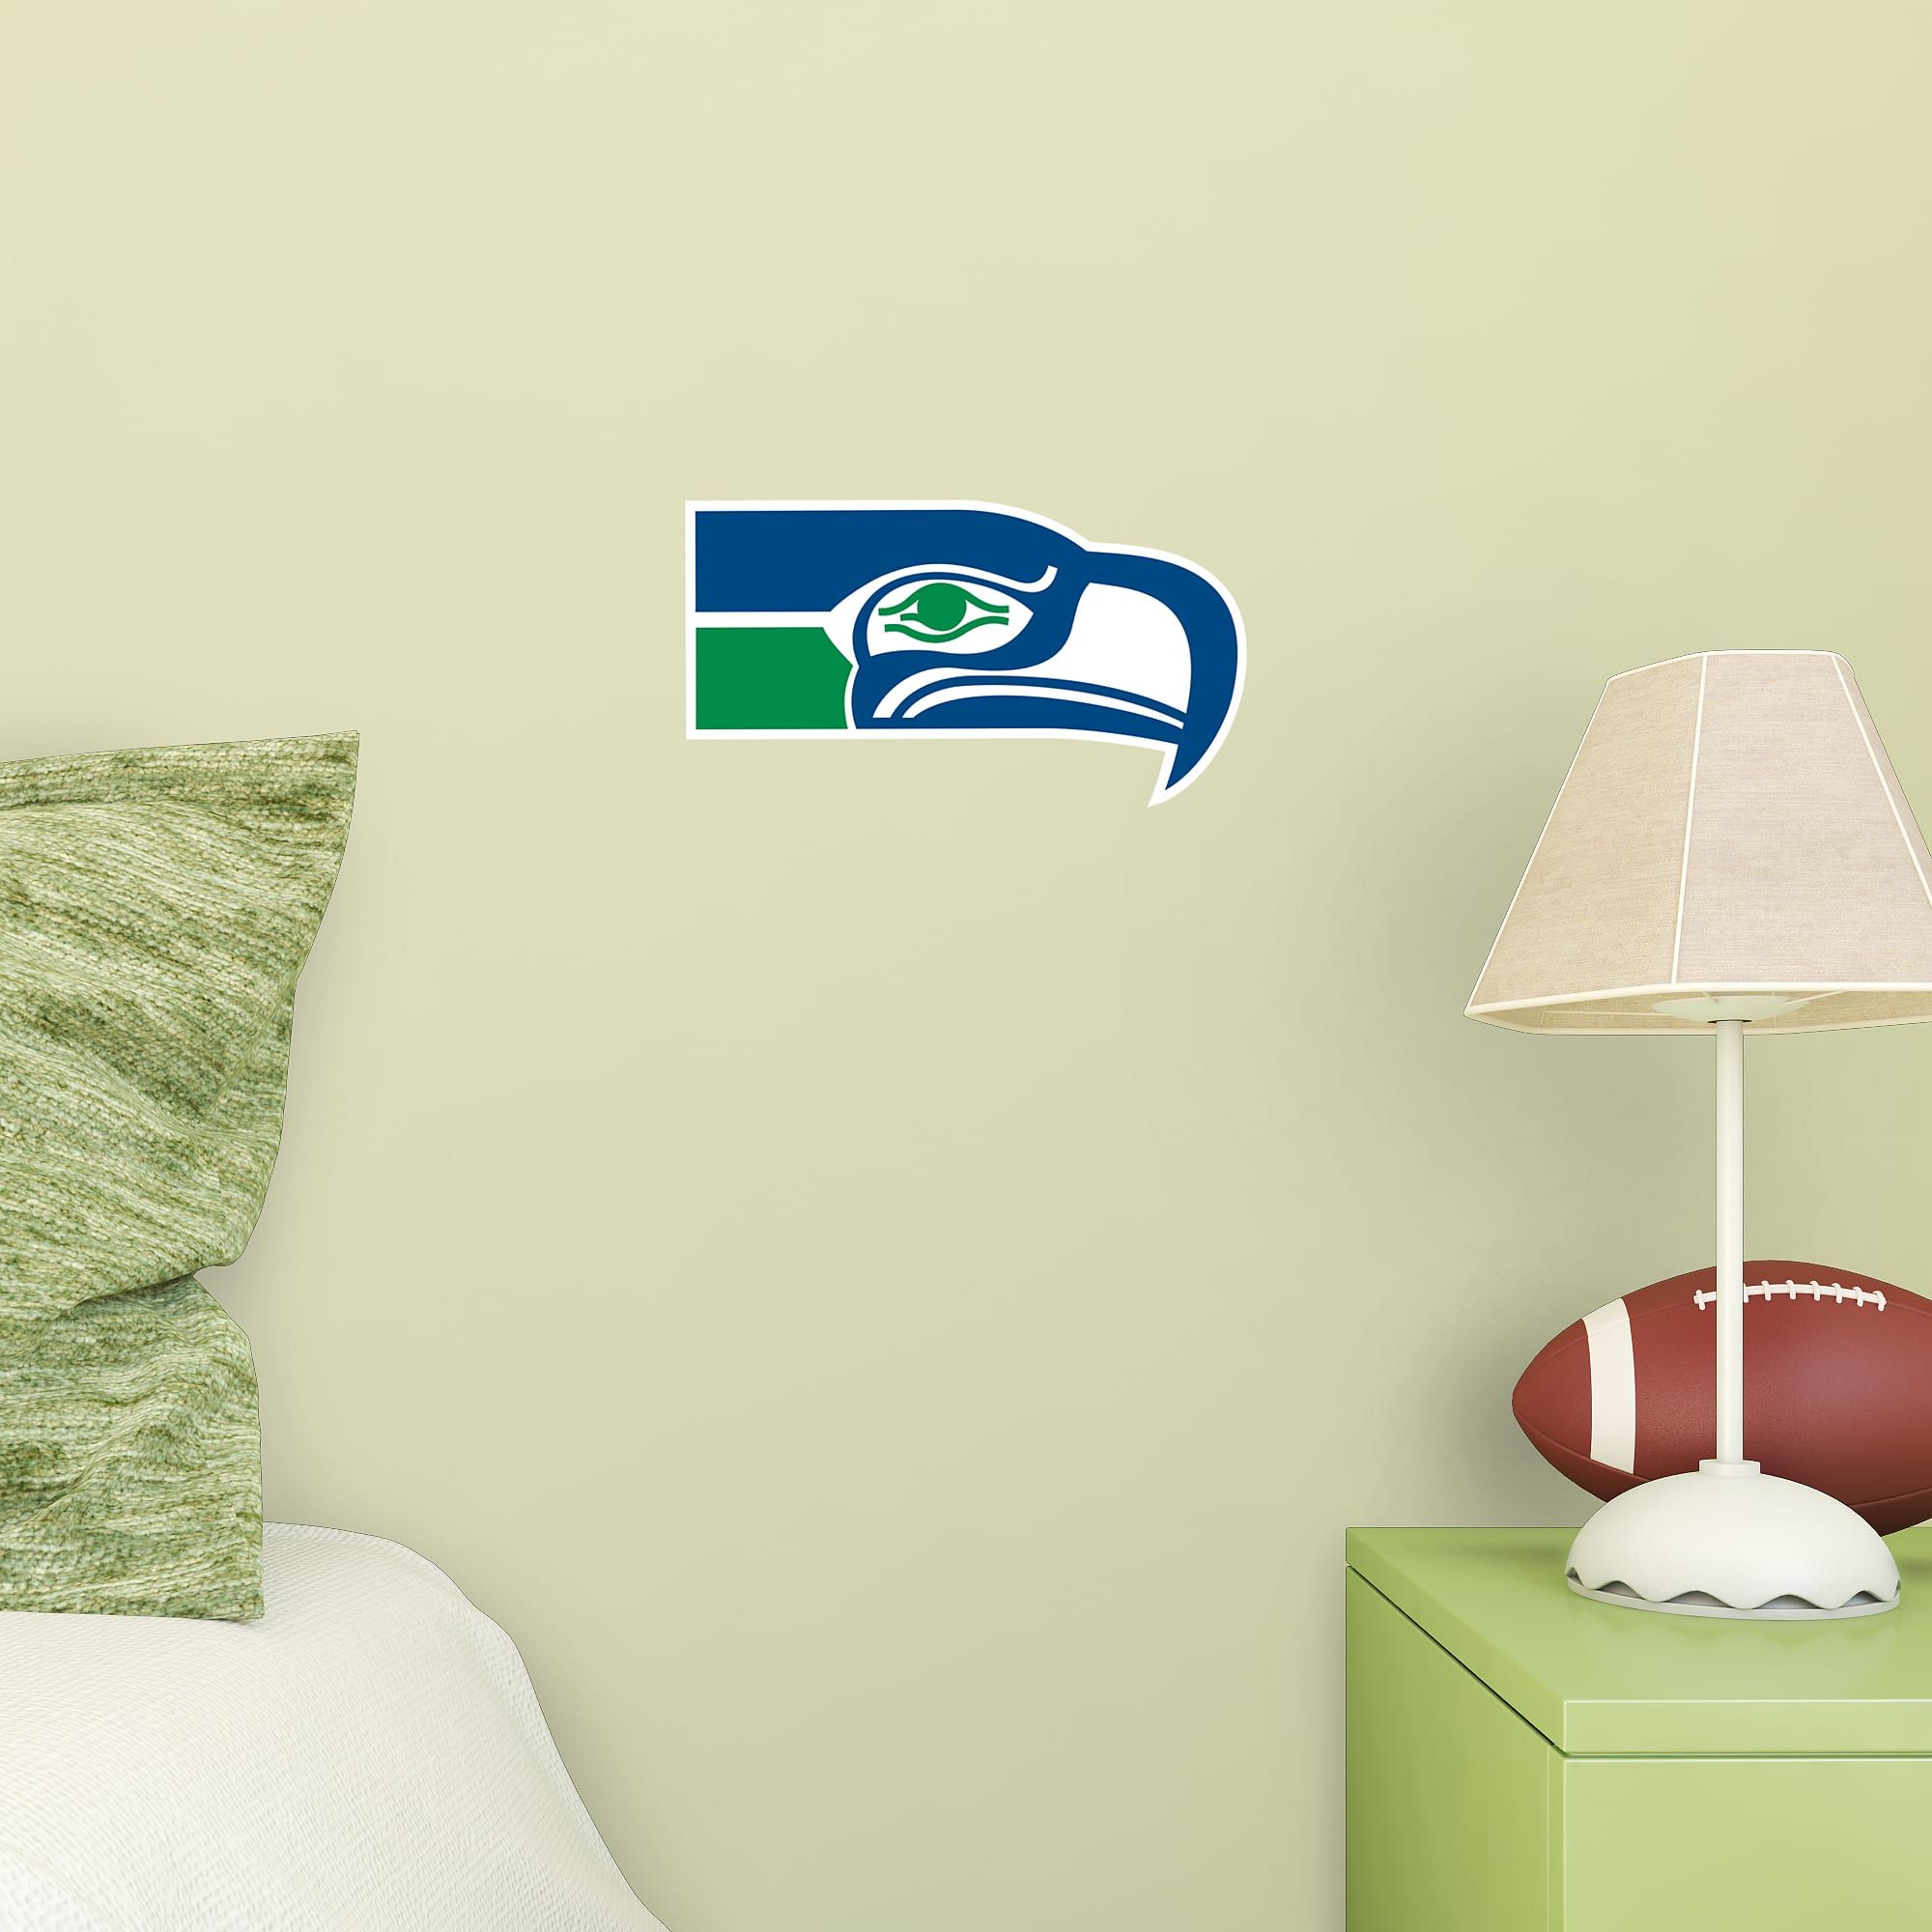 Seattle Seahawks: Classic Logo - Officially Licensed NFL Removable Wall Decal Large by Fathead | Vinyl